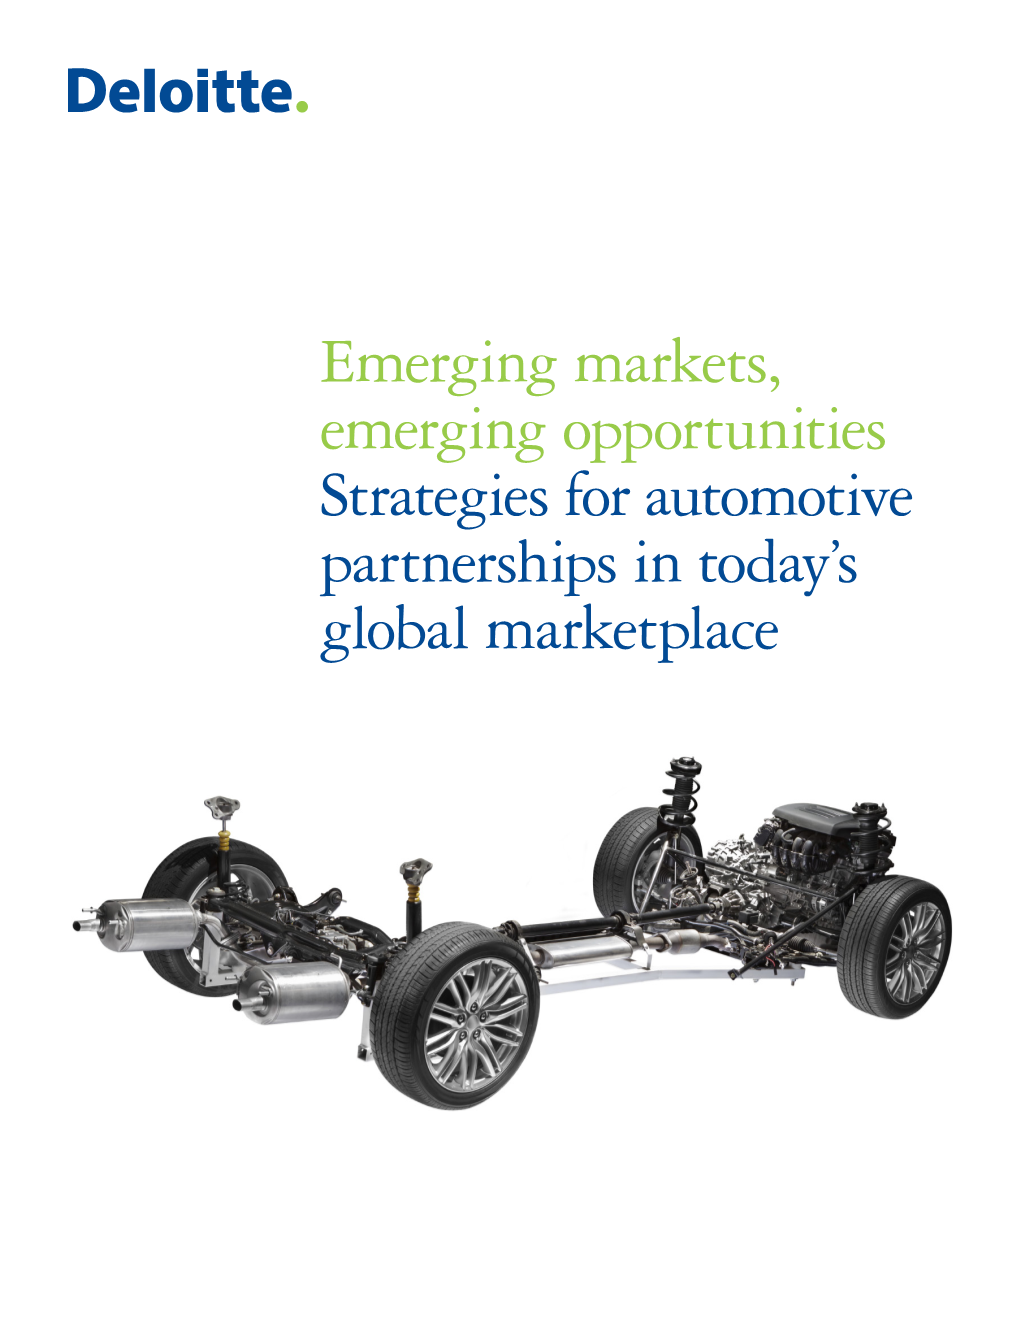 Strategies for Automotive Partnerships in Today's Global Marketplace